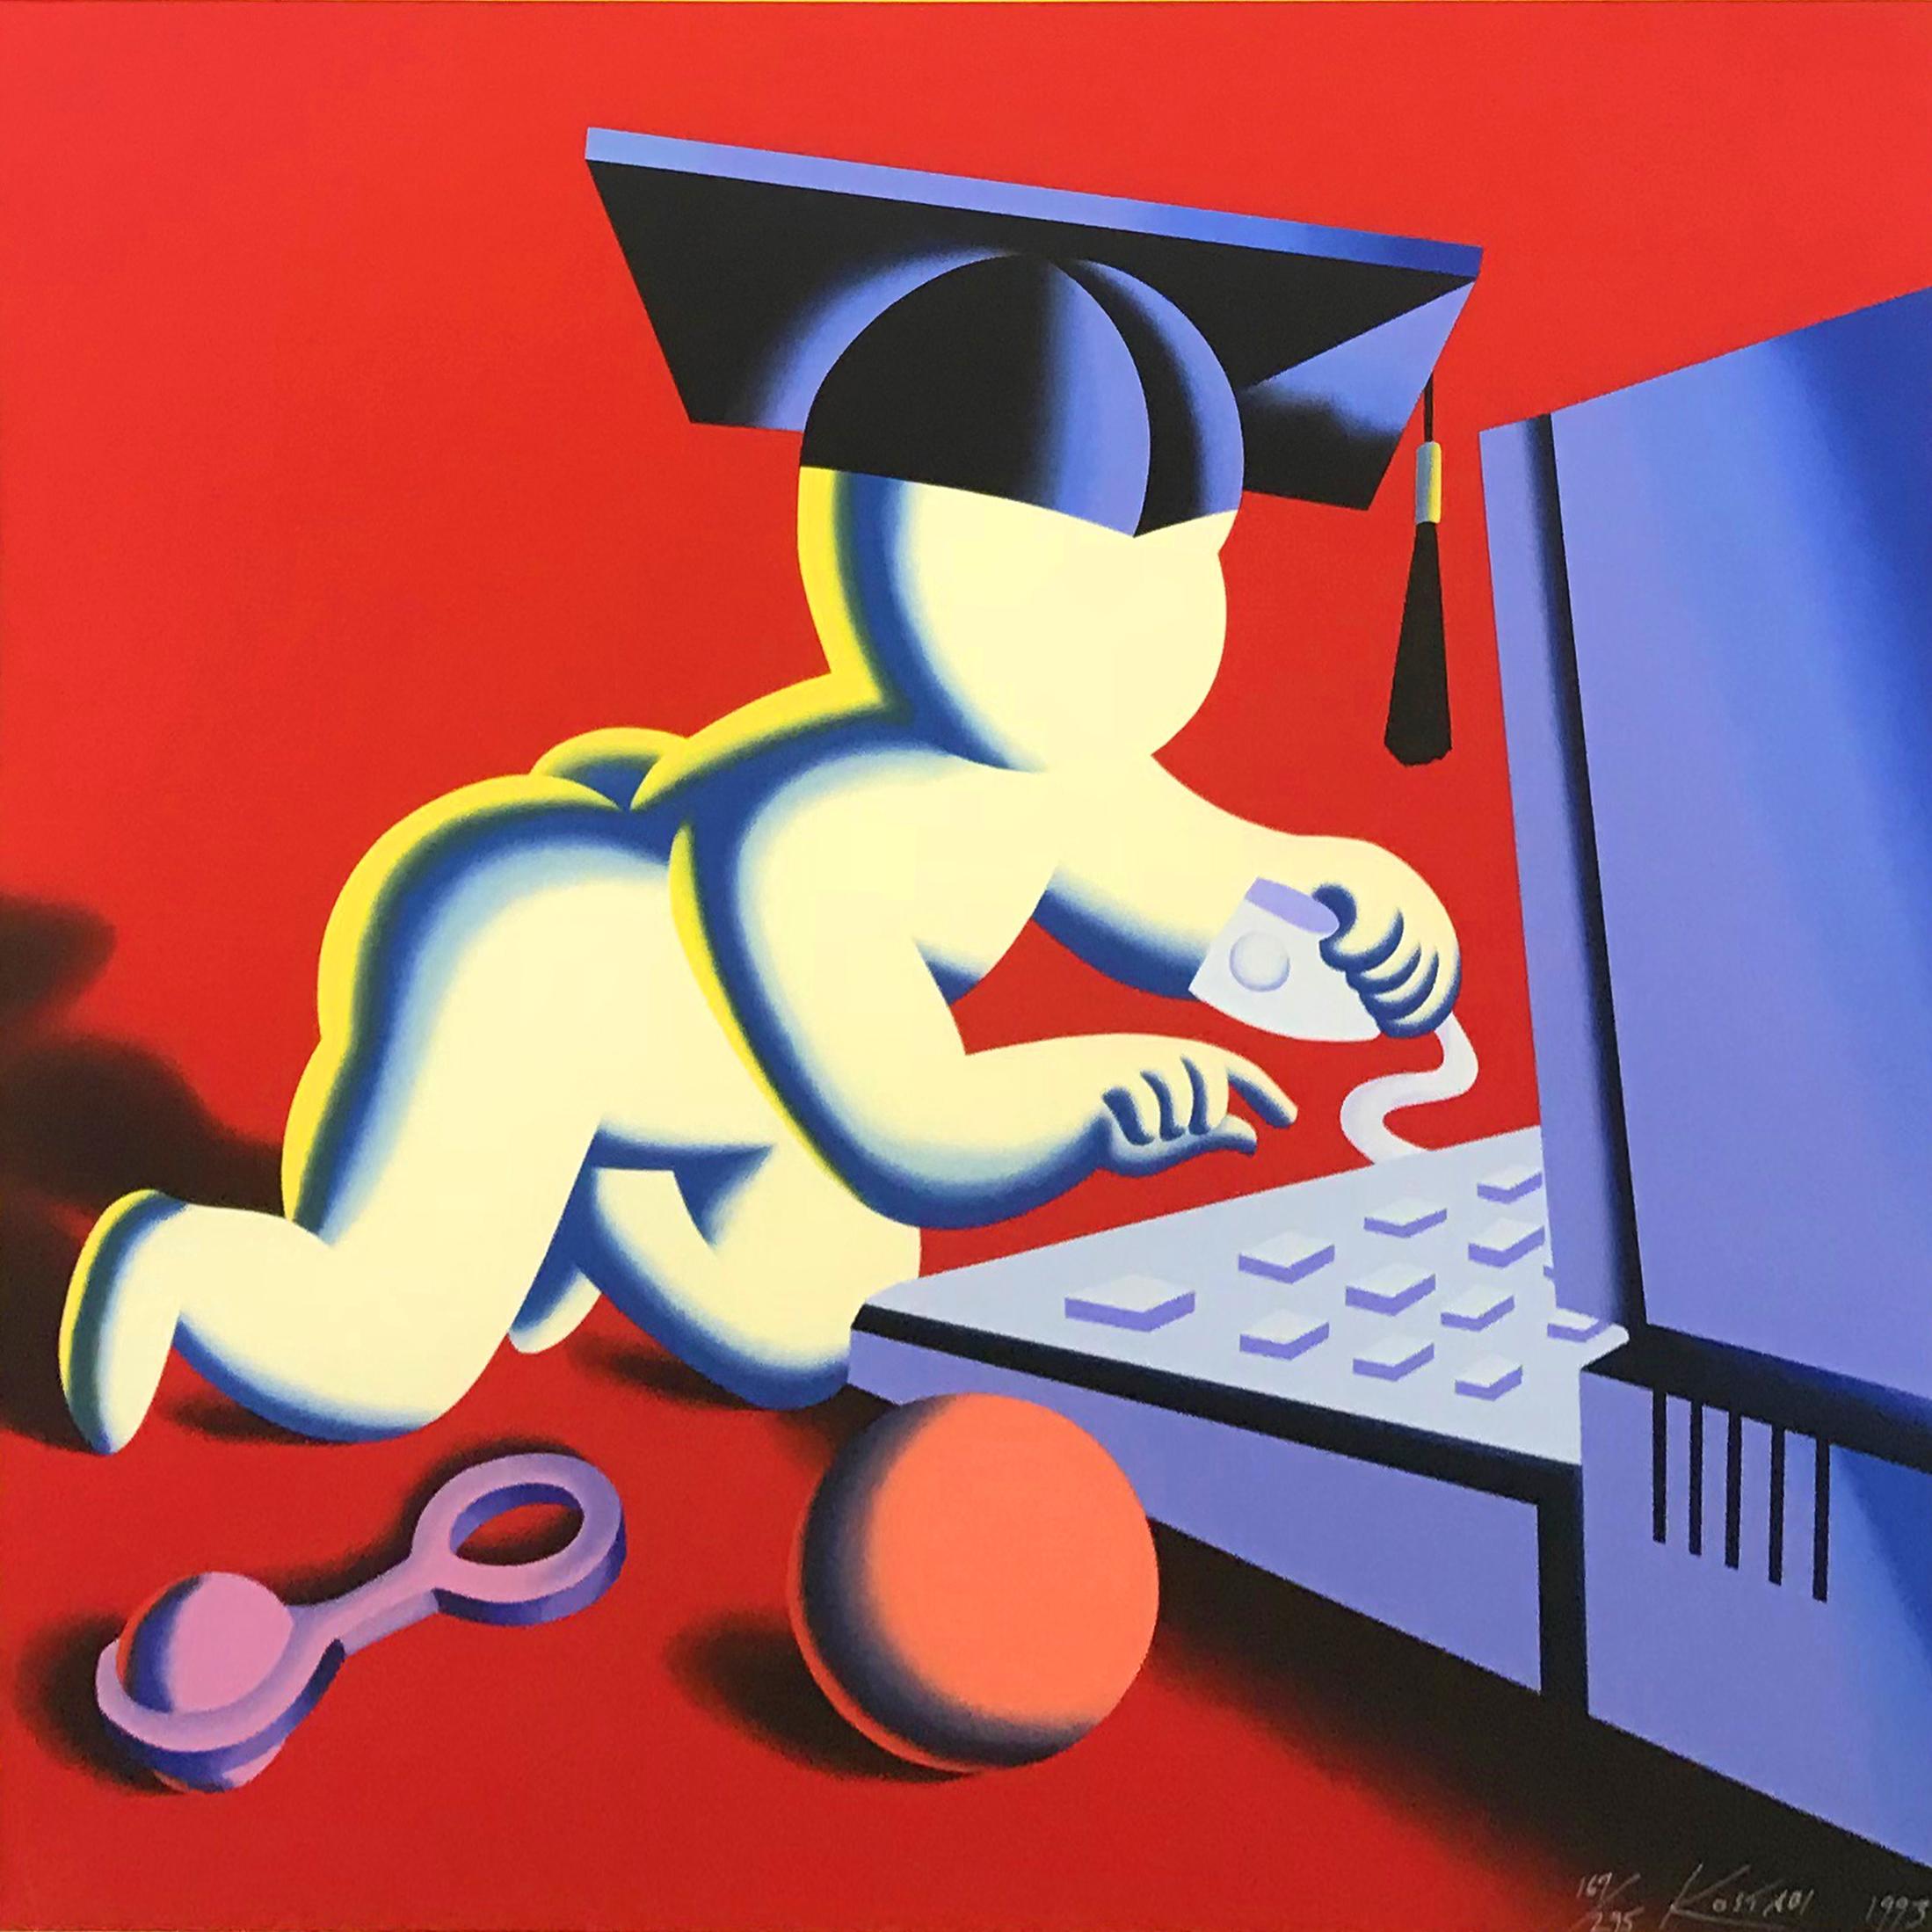 THE EARLY NERD GETS THE WORM - Print by Mark Kostabi